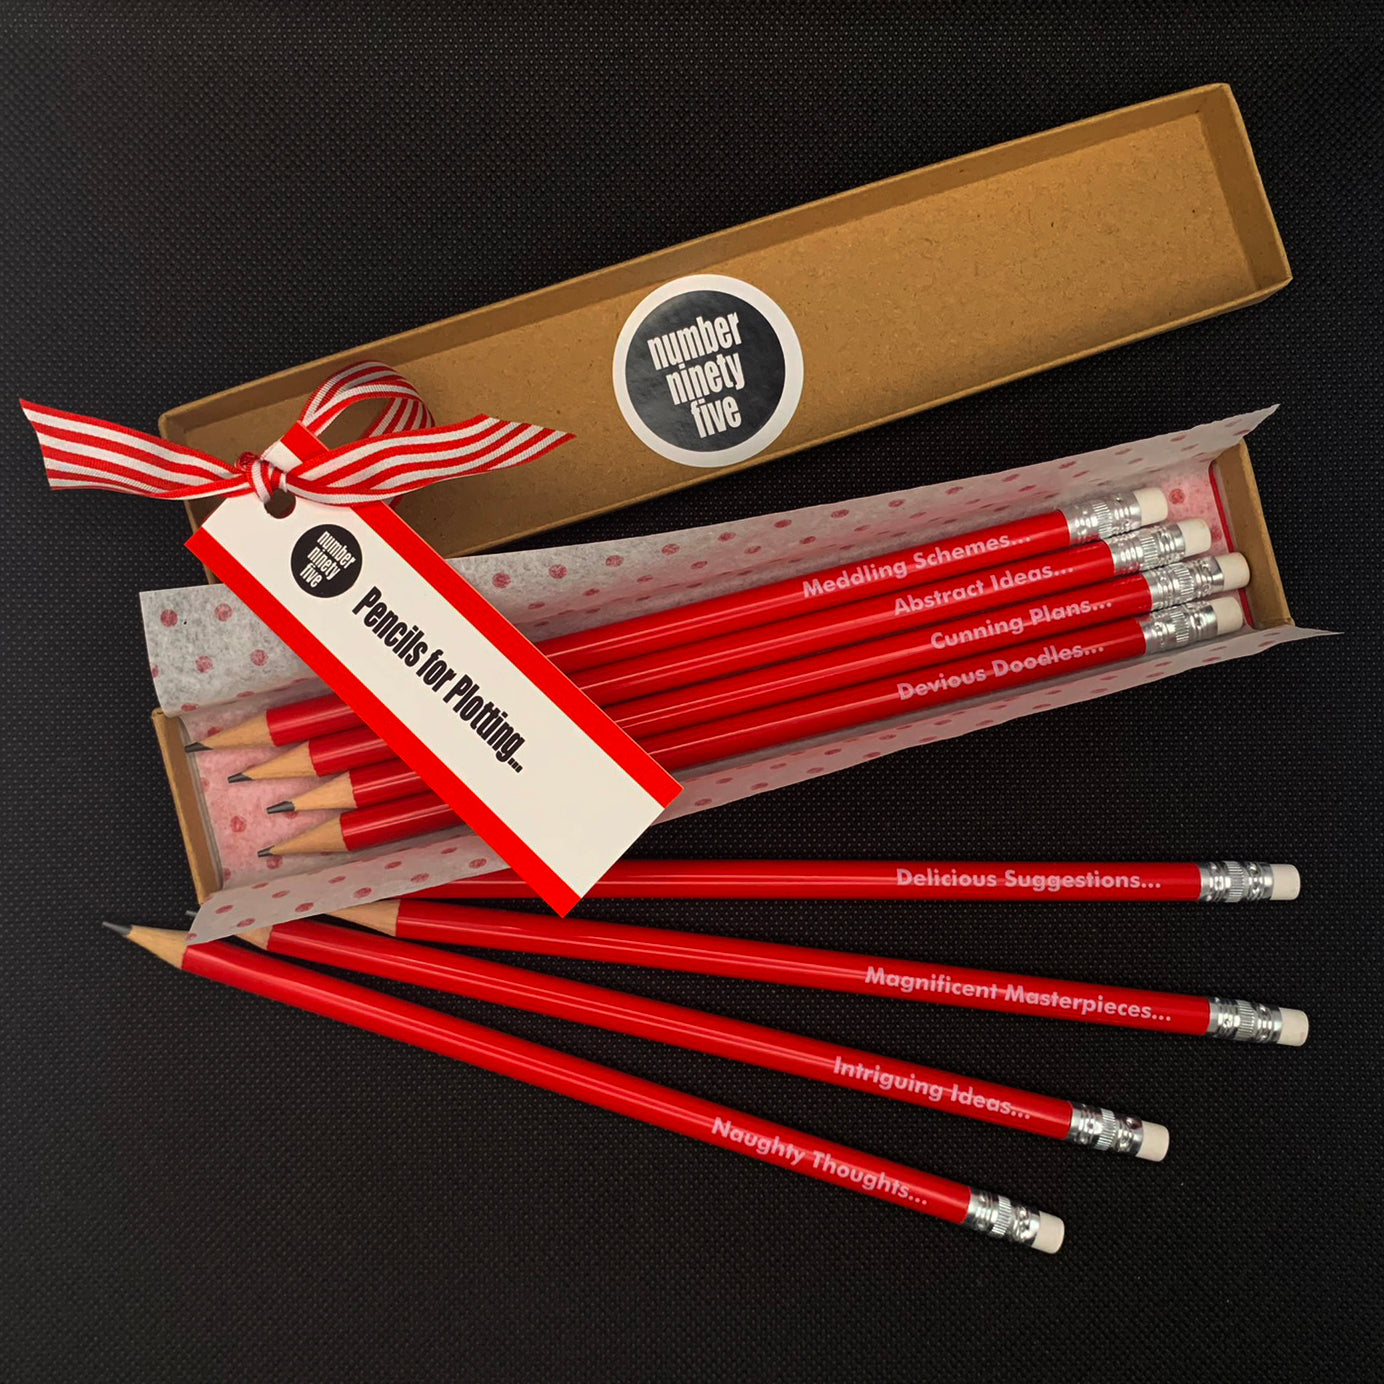 Number Ninety Five, Pencils for Plotting, 8 sharpened red pencils with white rubber tips, gift wrapped in a kraft box, with phases such as, Magnificent Masterpieces, Abstract Ideas, Cunning Plans and Delicious Suggestions written on them in white text.